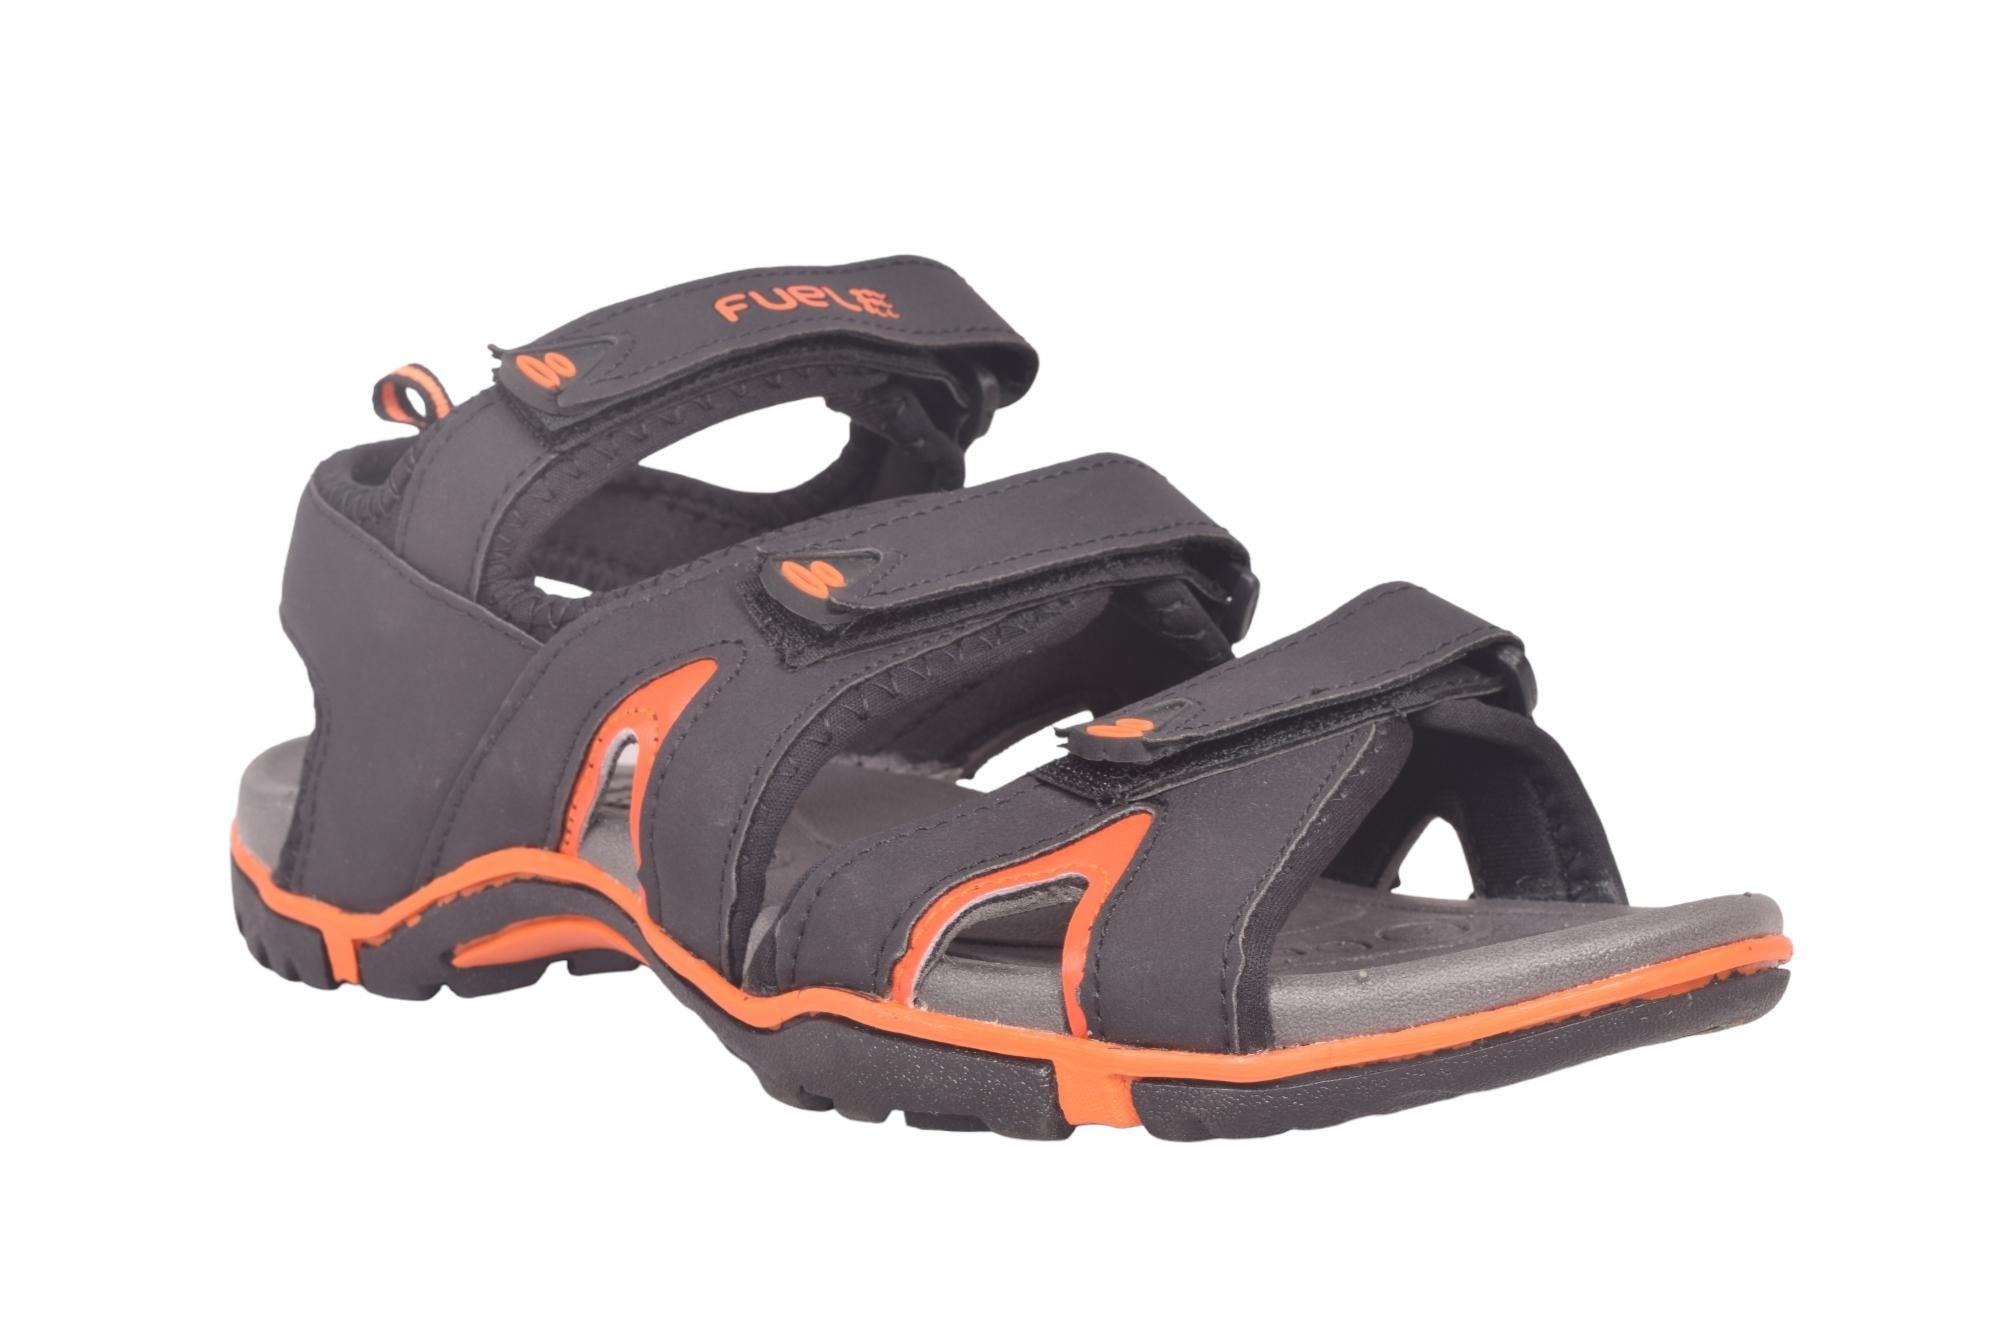 Brutus Black Sandals for Women - Fall/Winter collection - Camper USA